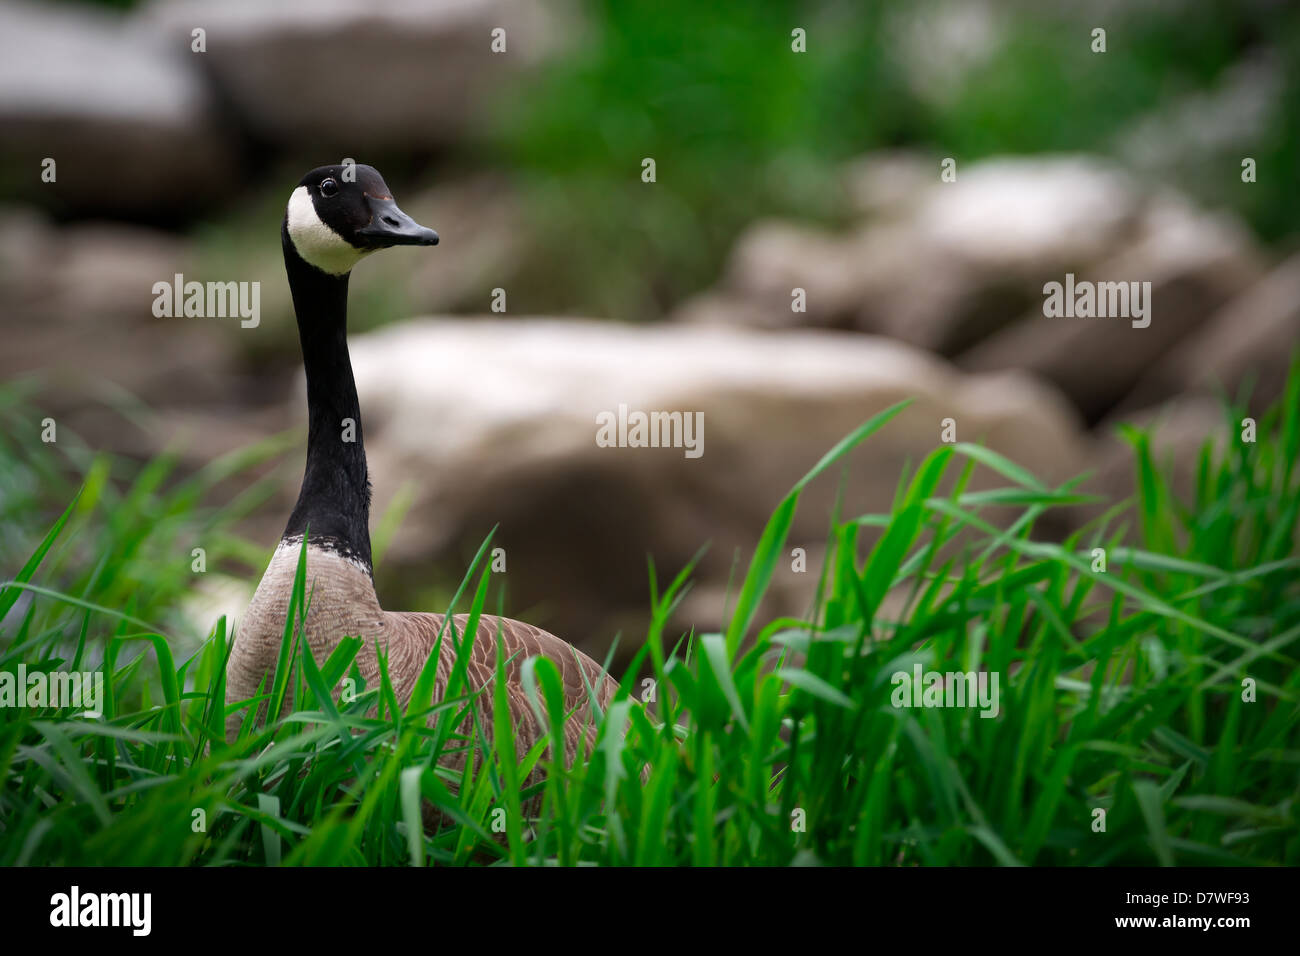 A curious Canada Goose (Branta canadensis) pokes his head up above tall, lush, green grass in Canadian wetlands. Stock Photo